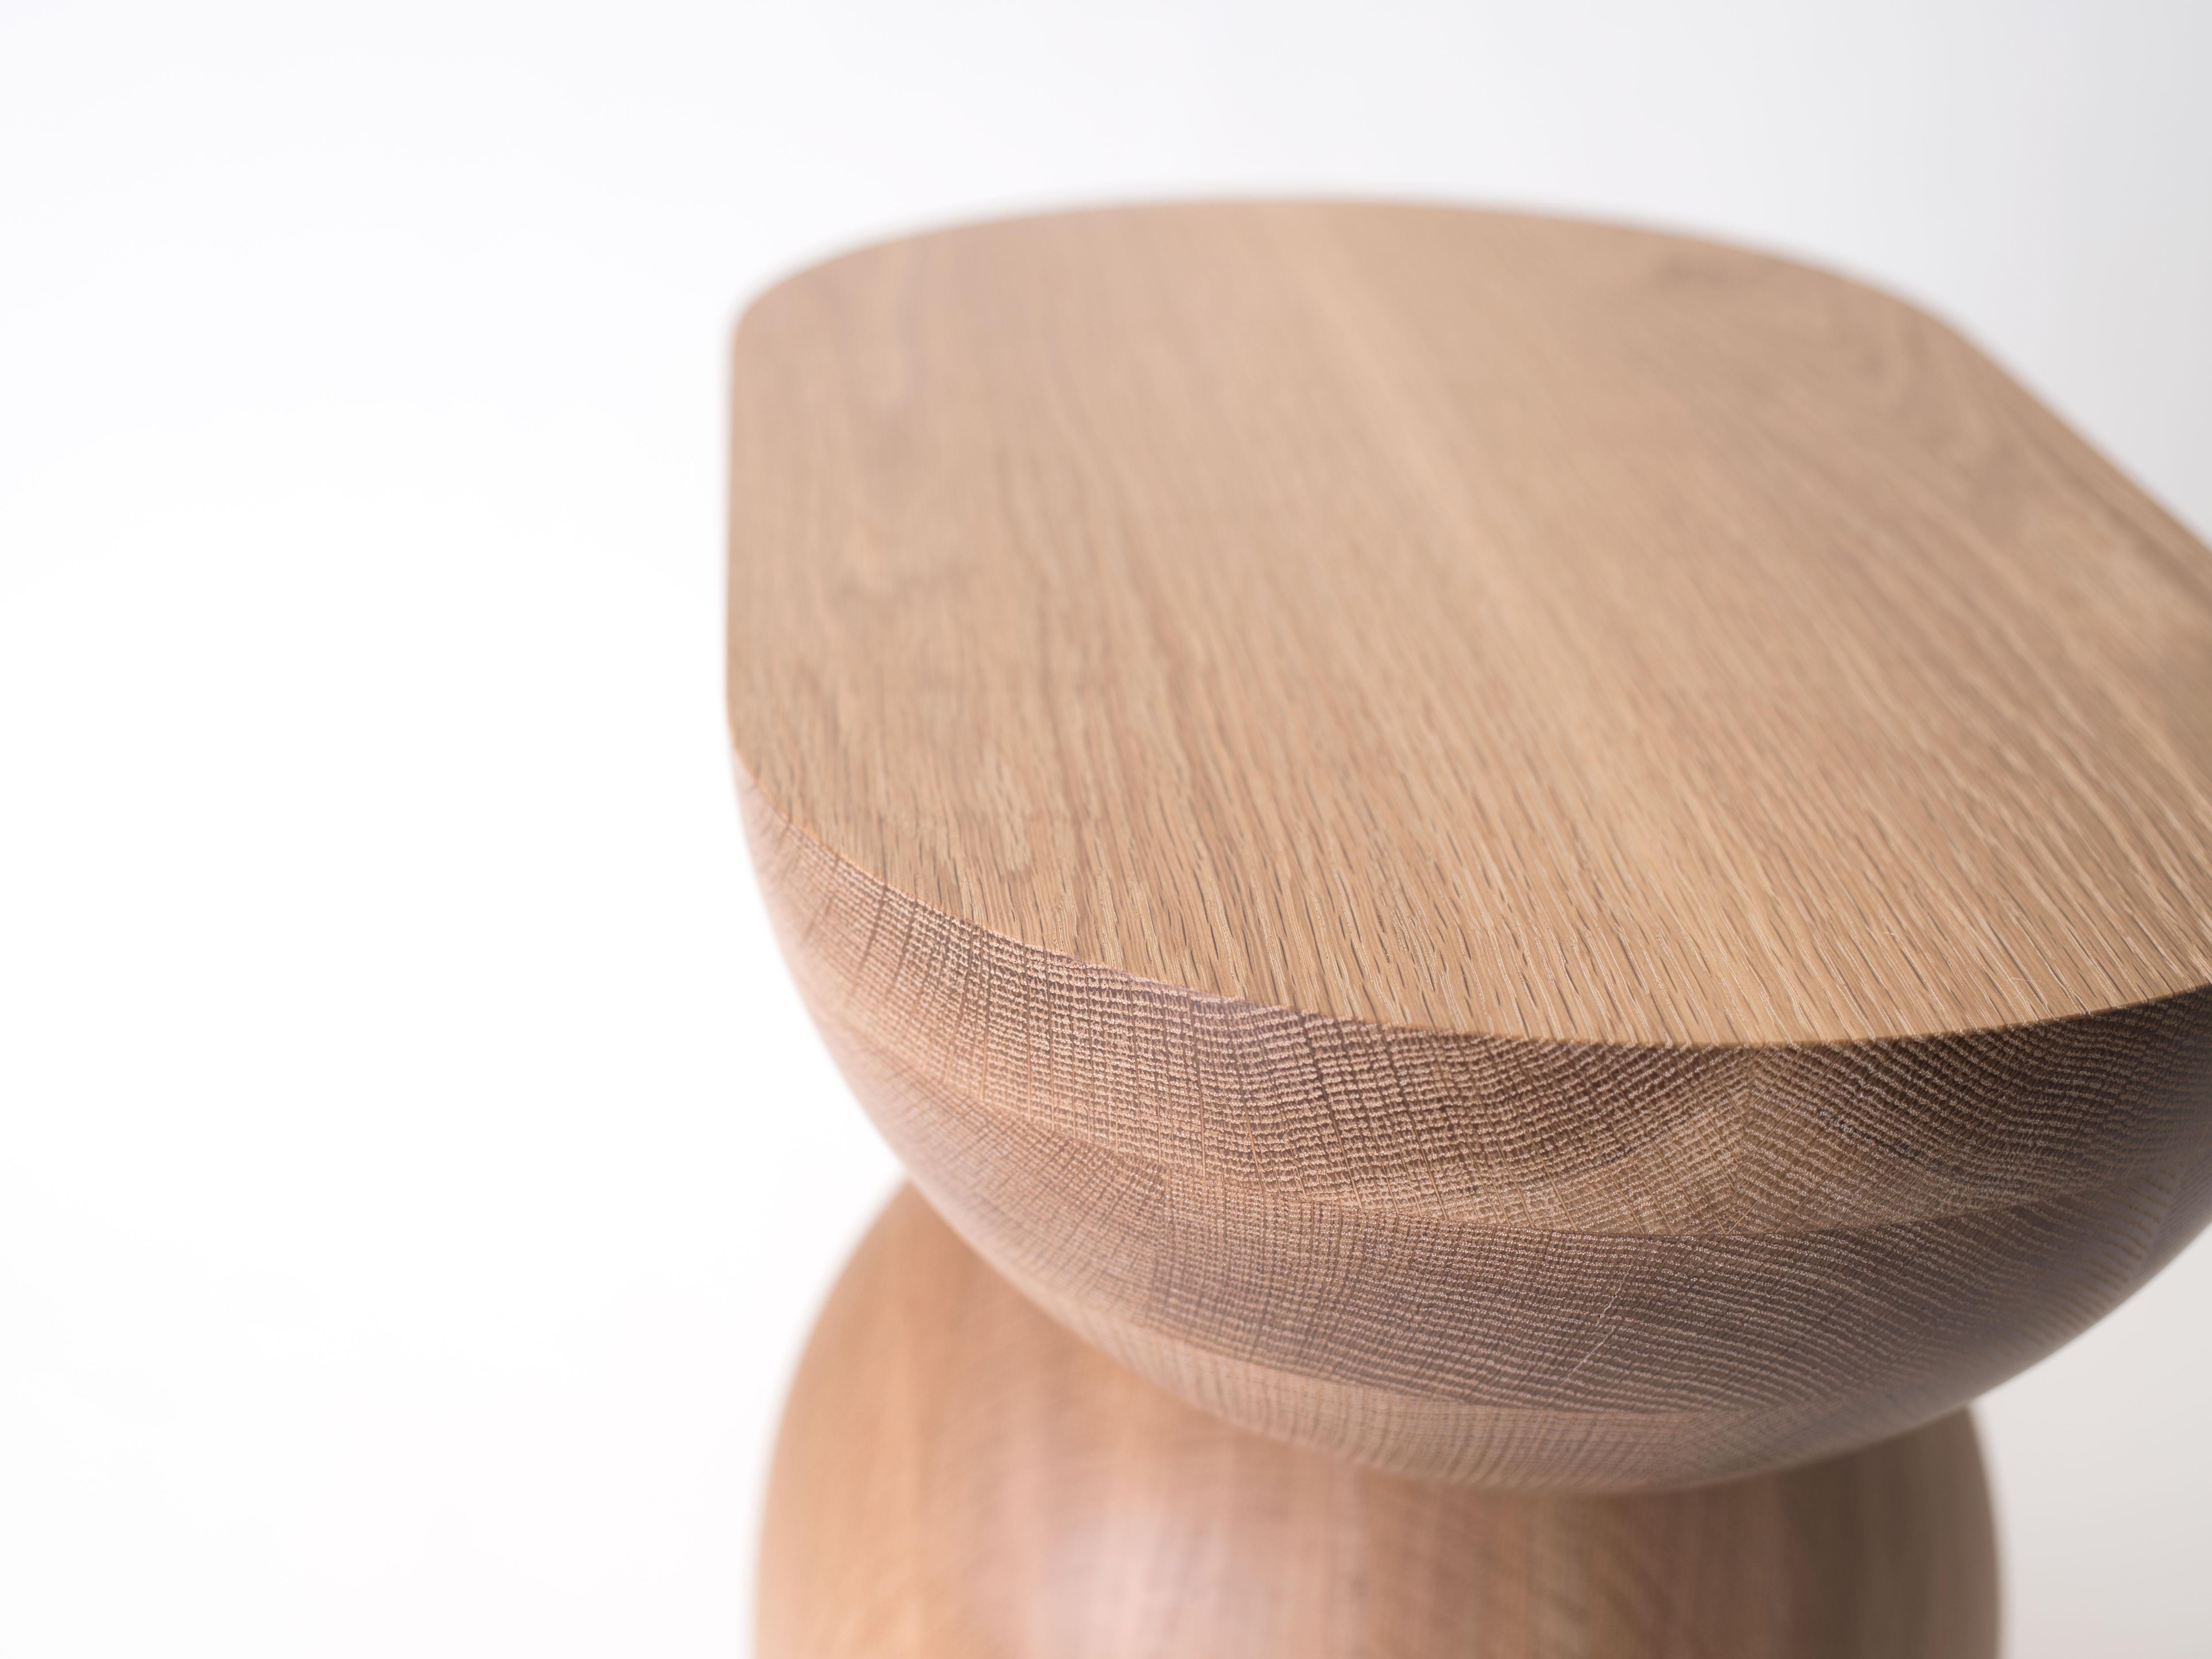 The Cleave side table is handcrafted out of solid white oak. The Cleave is built by gluing two chunks of oak together with a layer of paper between. After handing turning it into shape, it is 